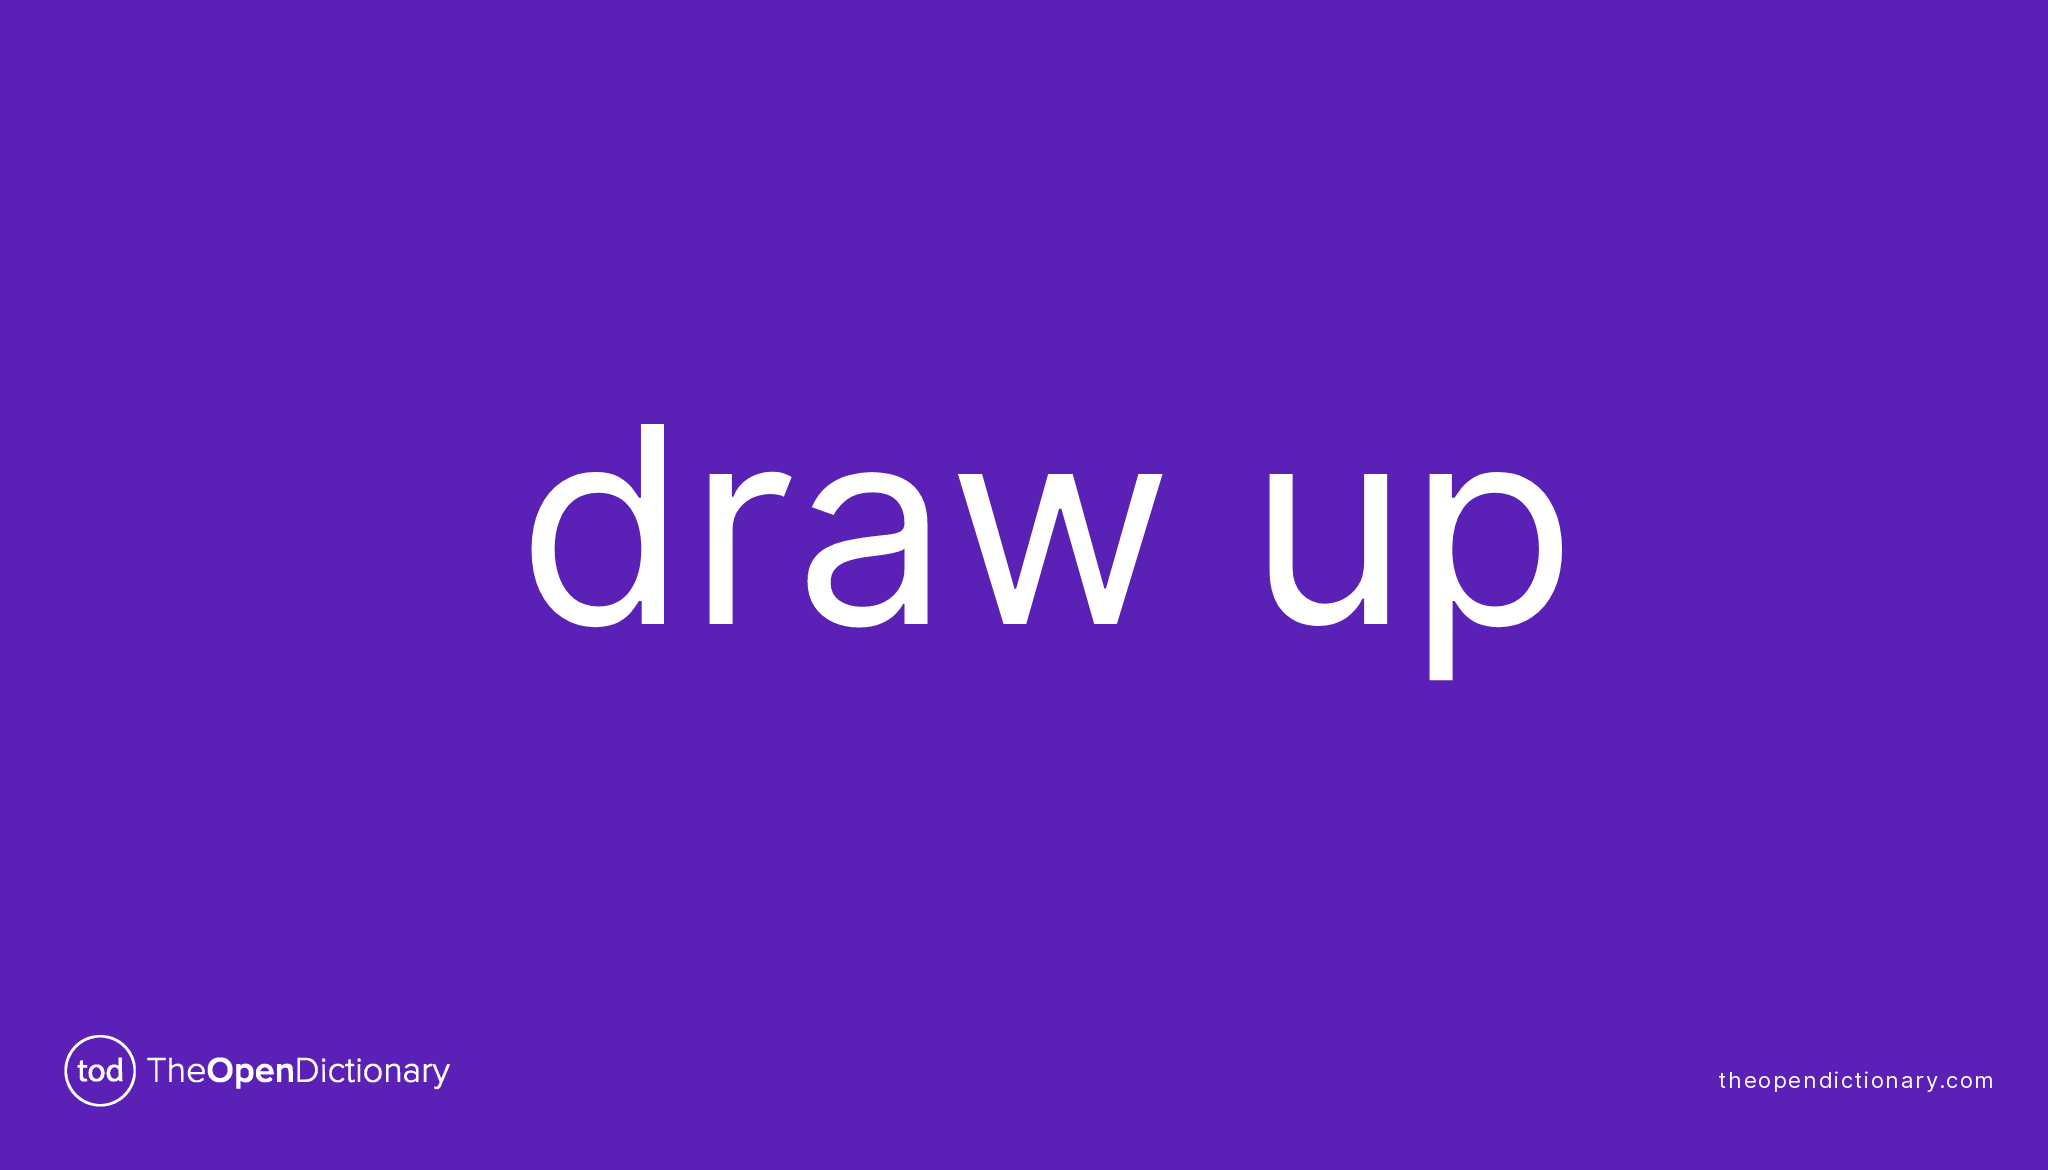 DRAW UP Phrasal Verb DRAW UP Definition, Meaning and Example